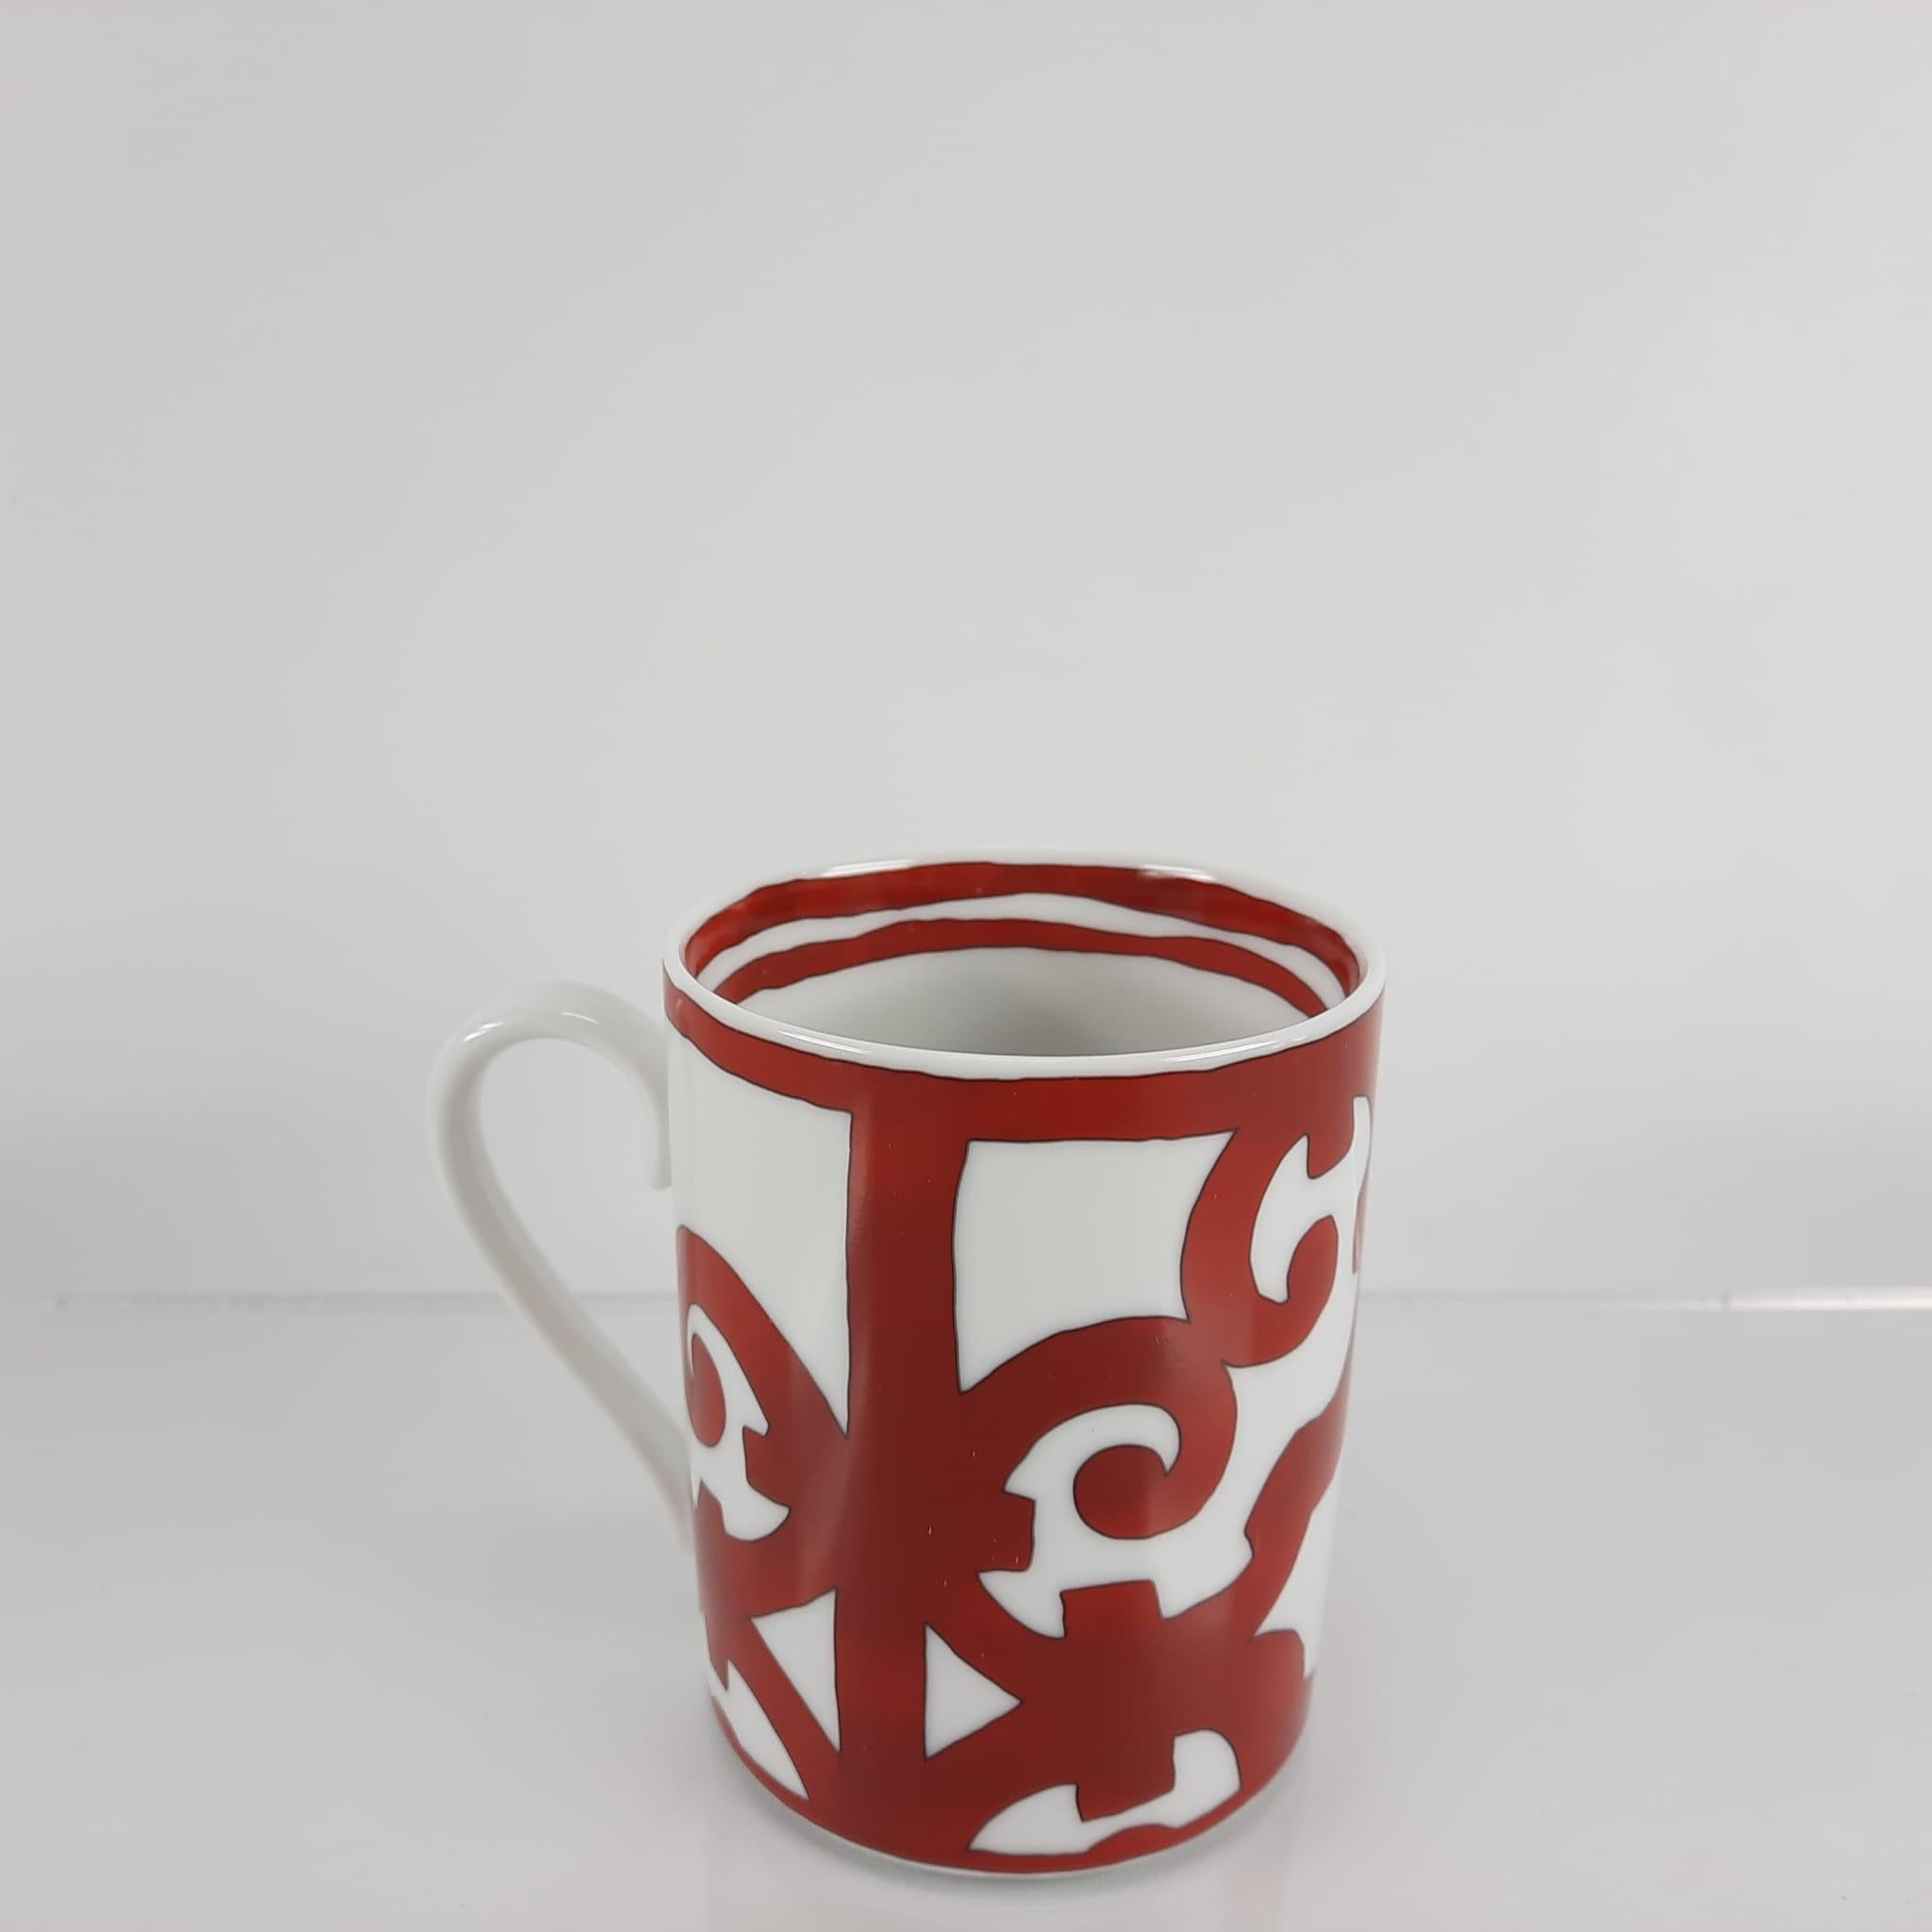 Mug in porcelain
Decorations are screen-printed and applied by hand